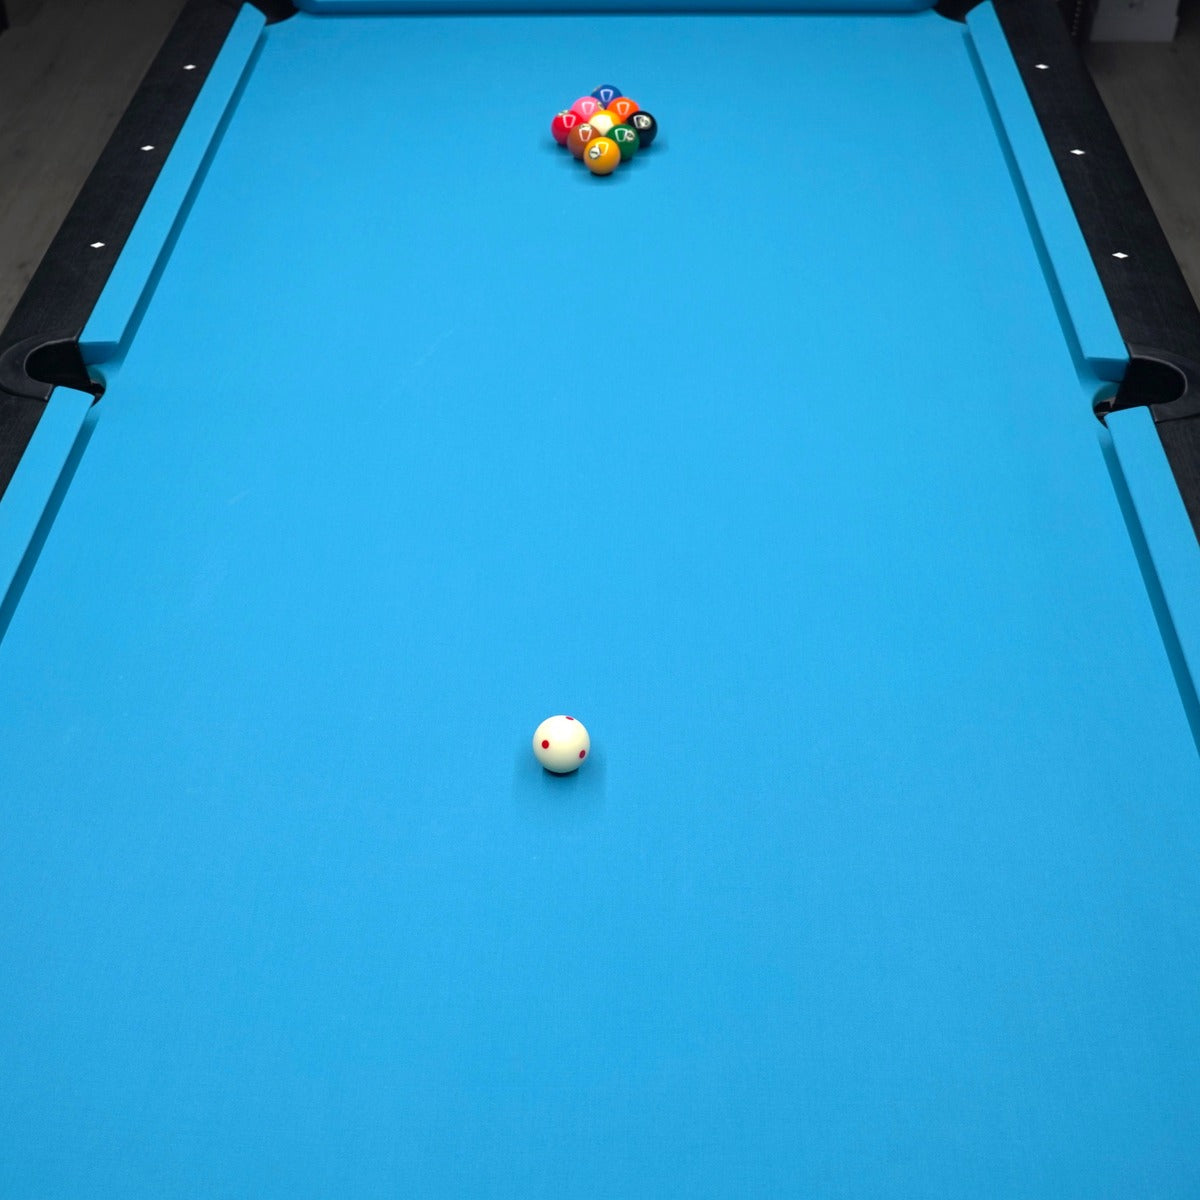 pool table light evenly illuminates the entire table